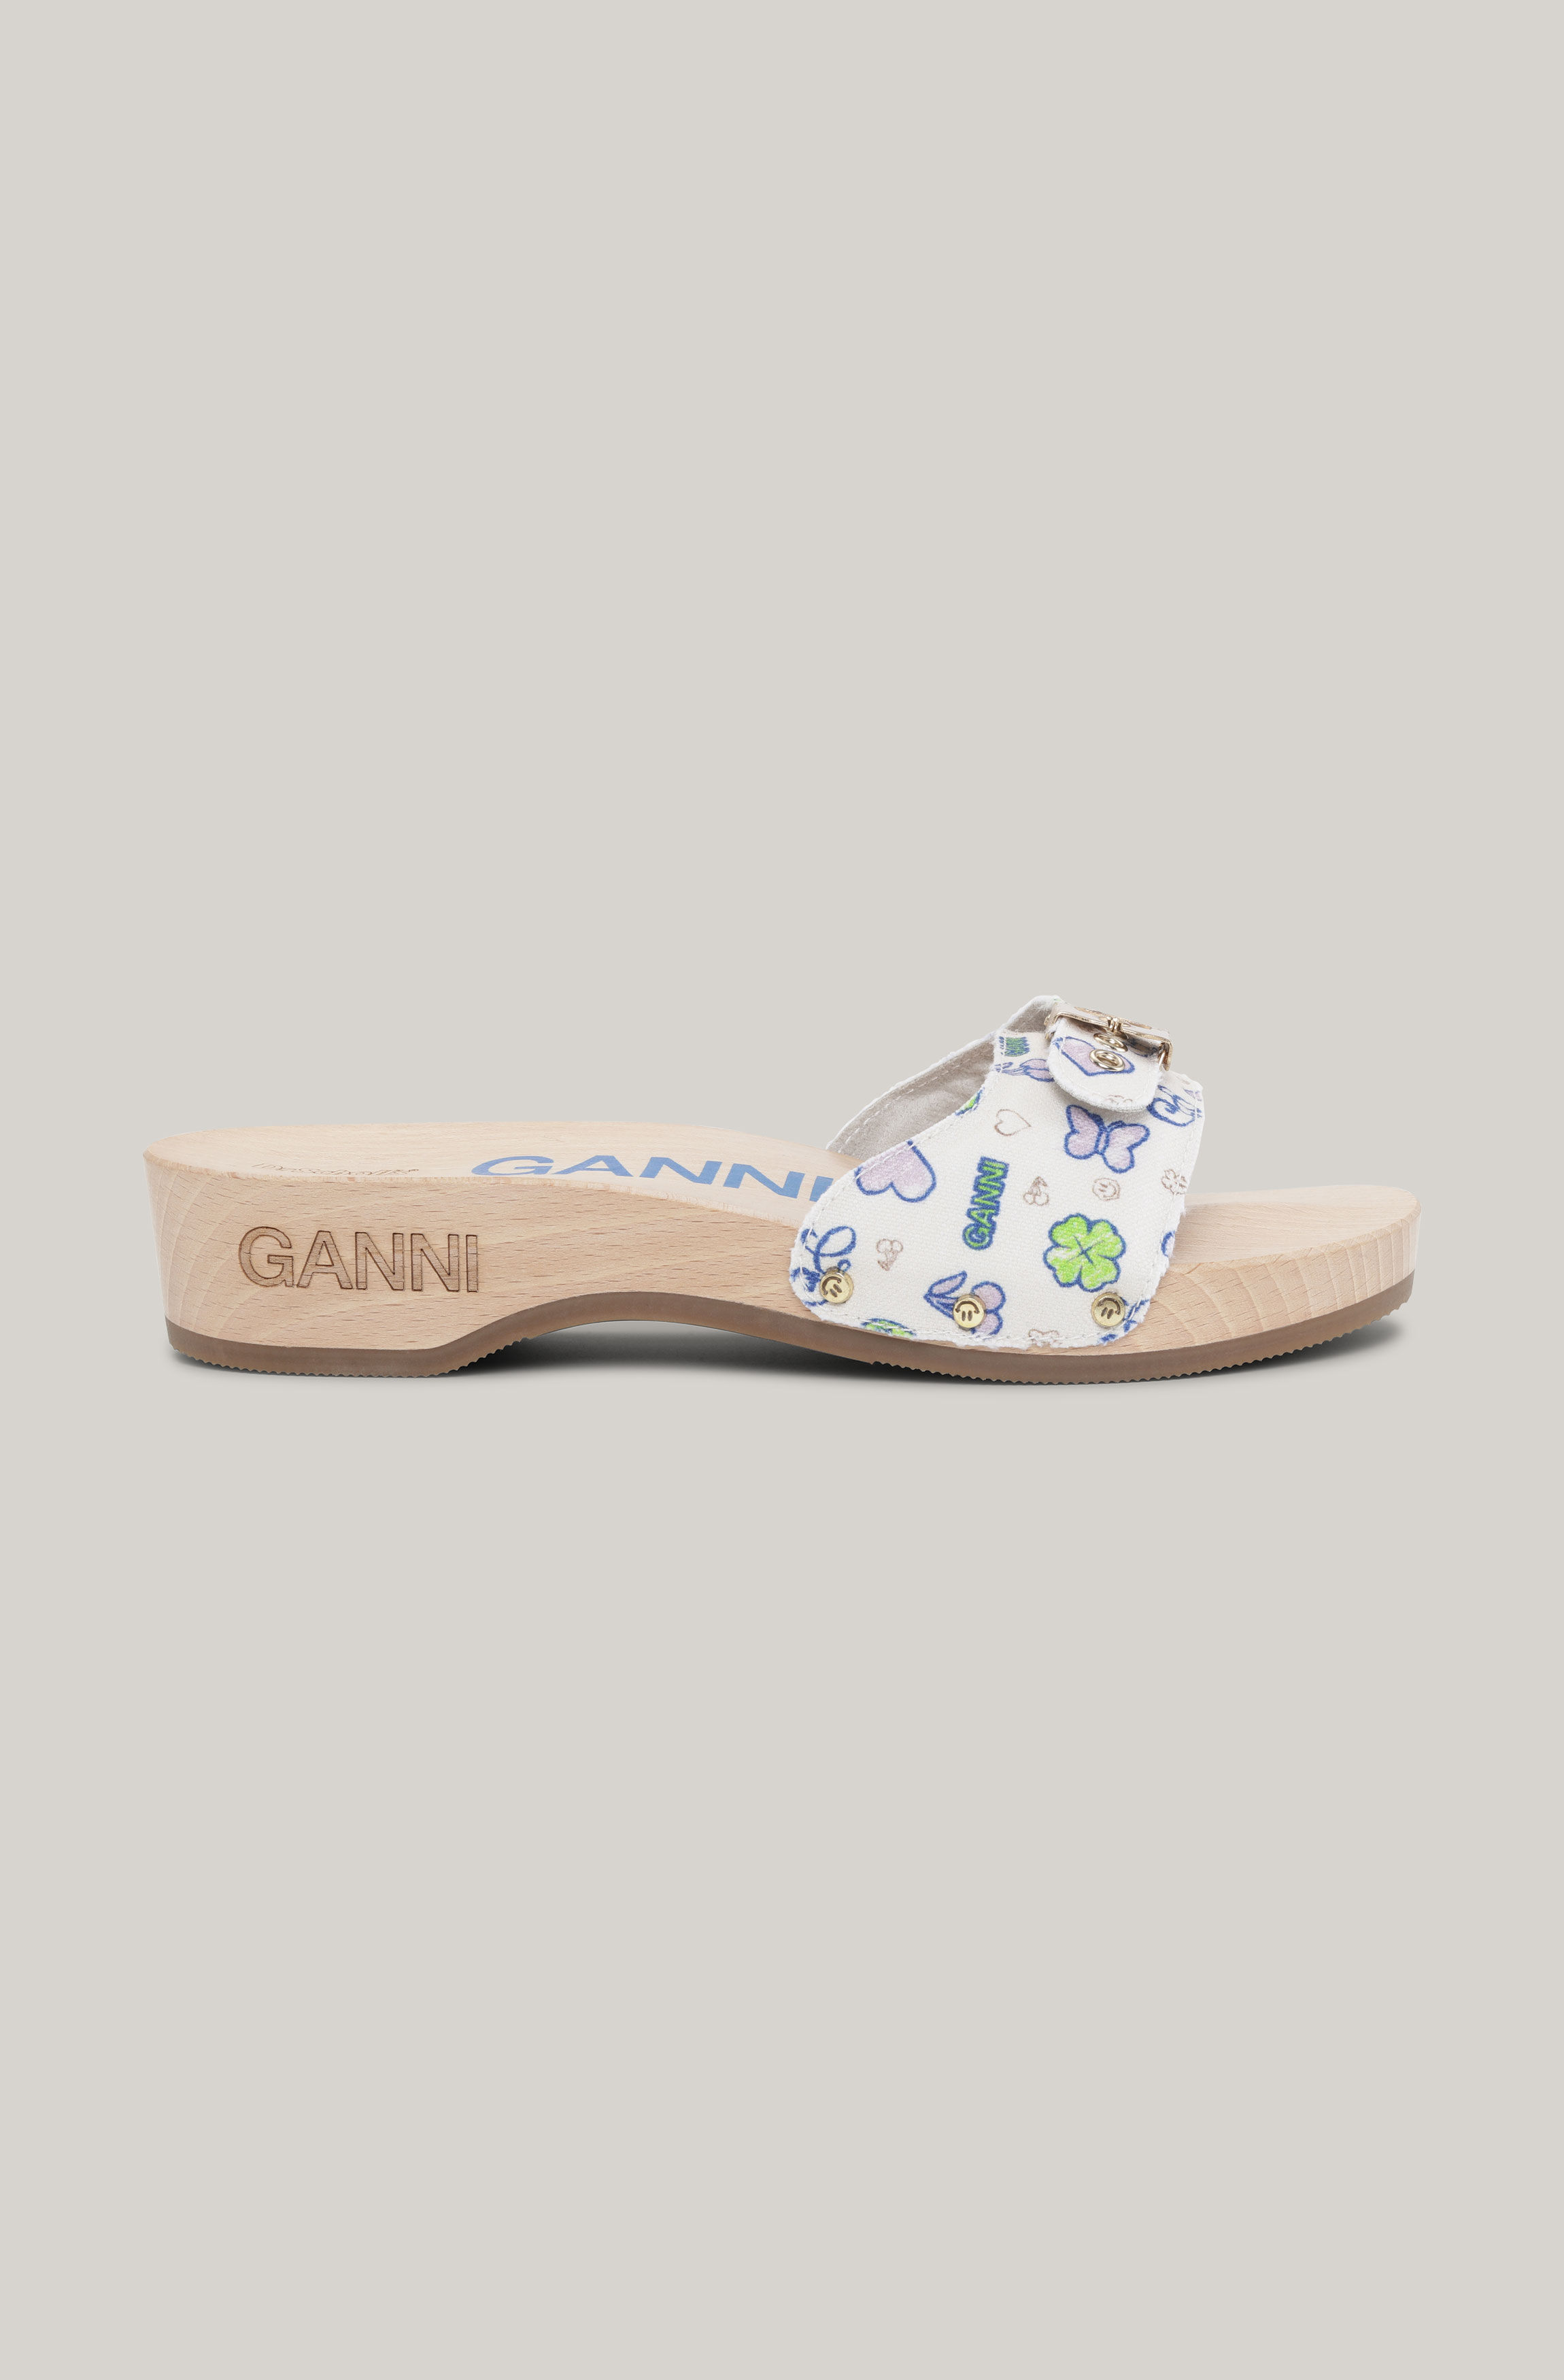 GANNI Collections | Latest Releases & Exclusives | GANNI US